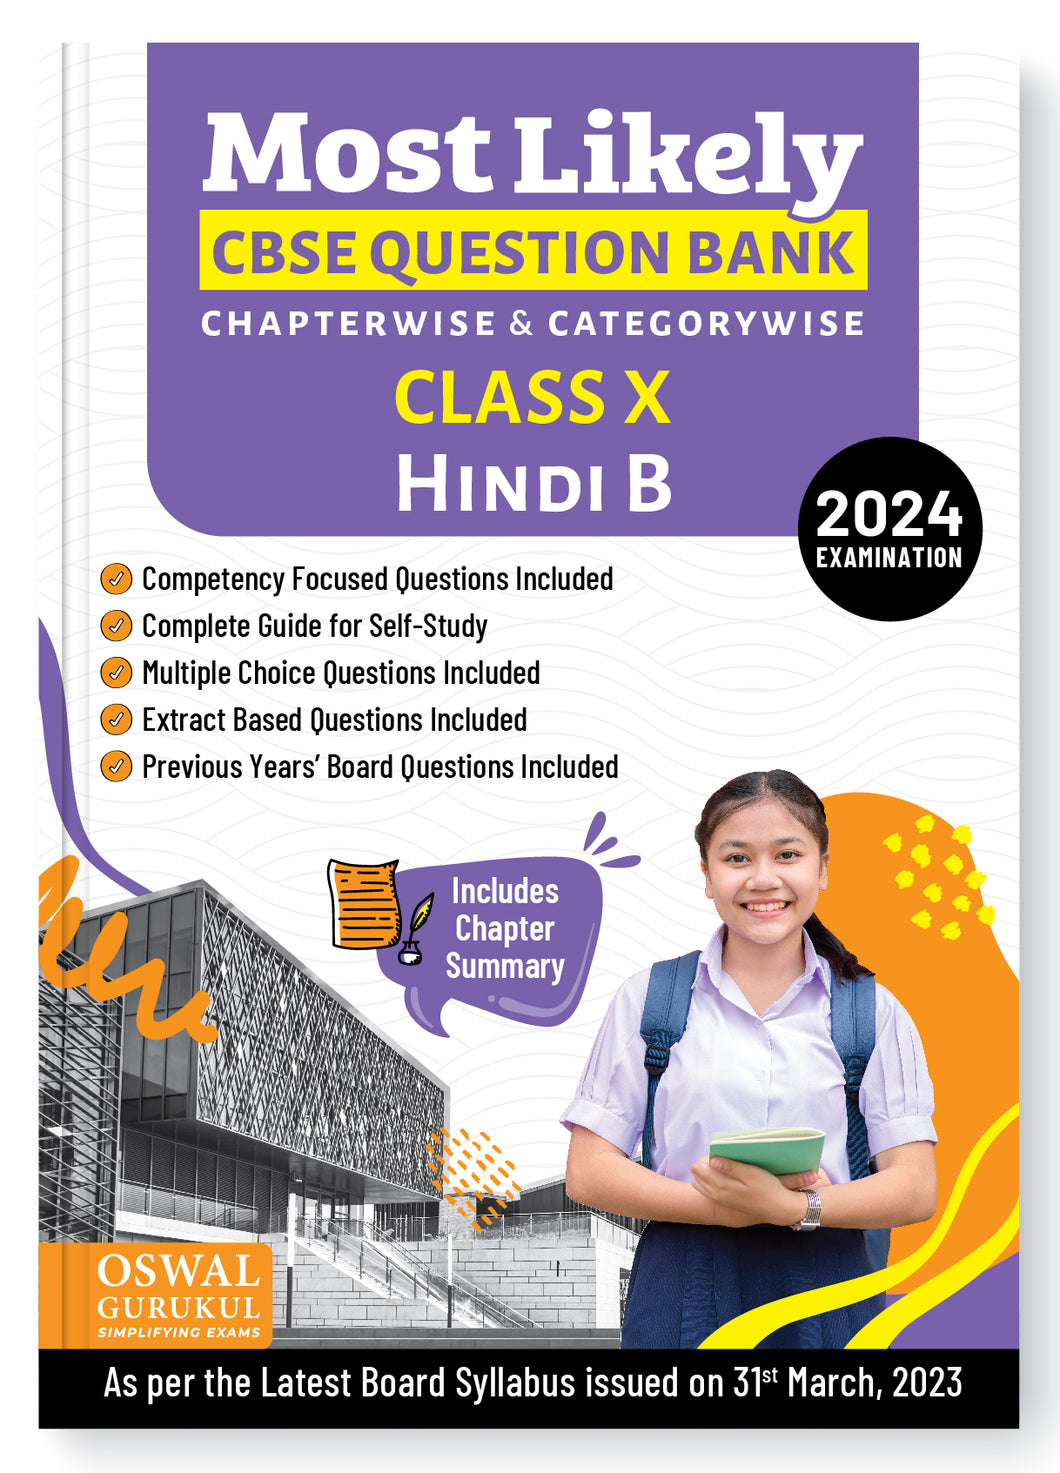 Oswal - Gurukul Hindi-B Most Likely Question Bank : CBSE Class 10 for 2024 Exam